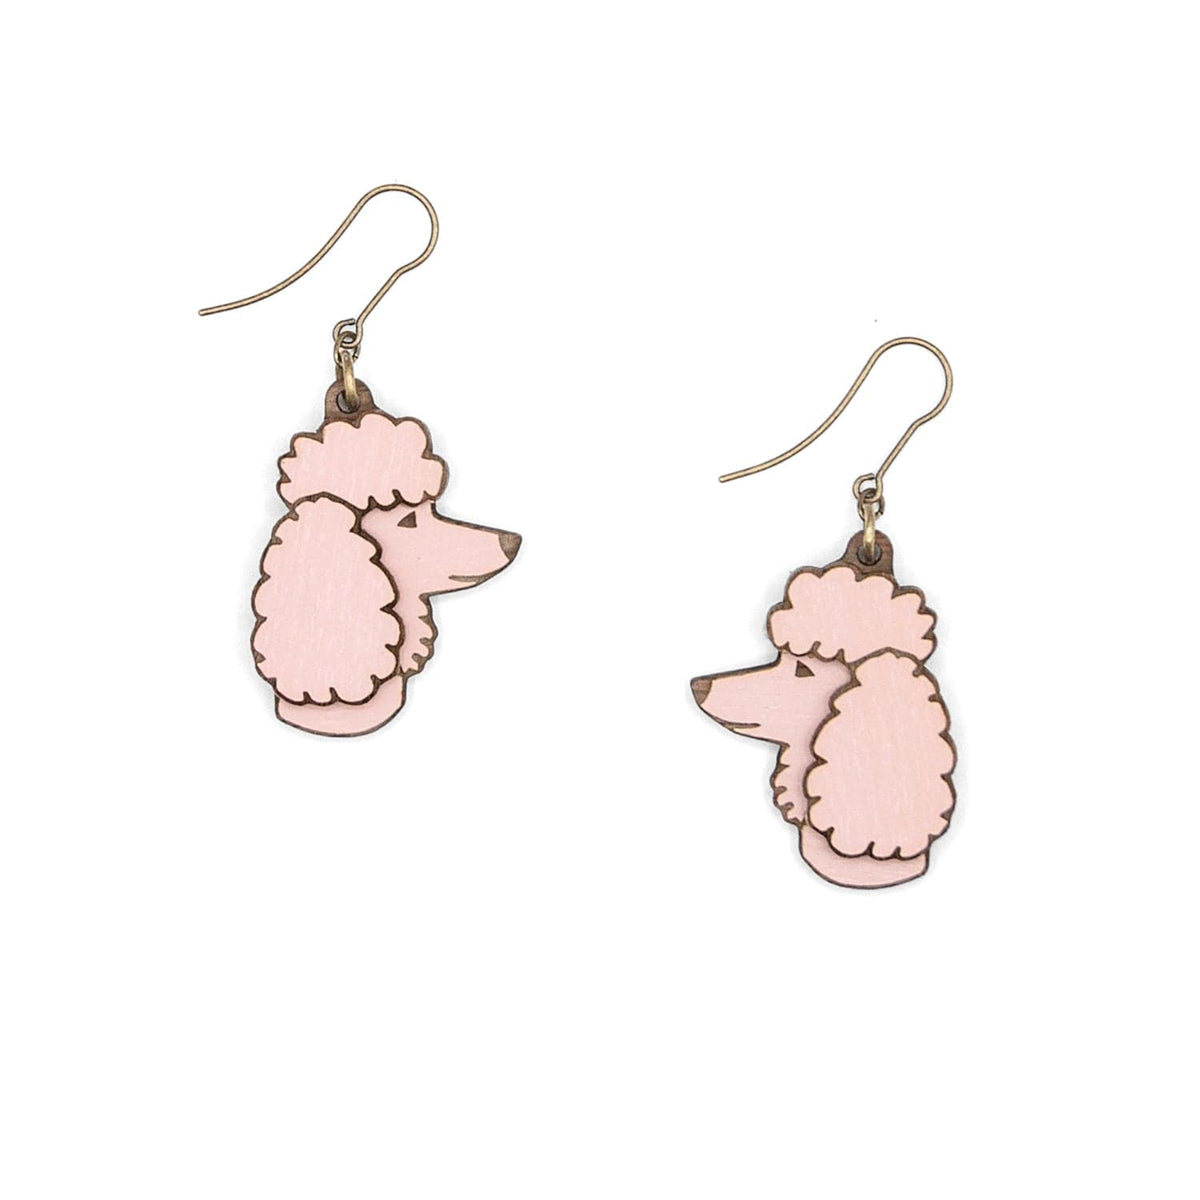 Materia Rica Poodle Wooden Earrings